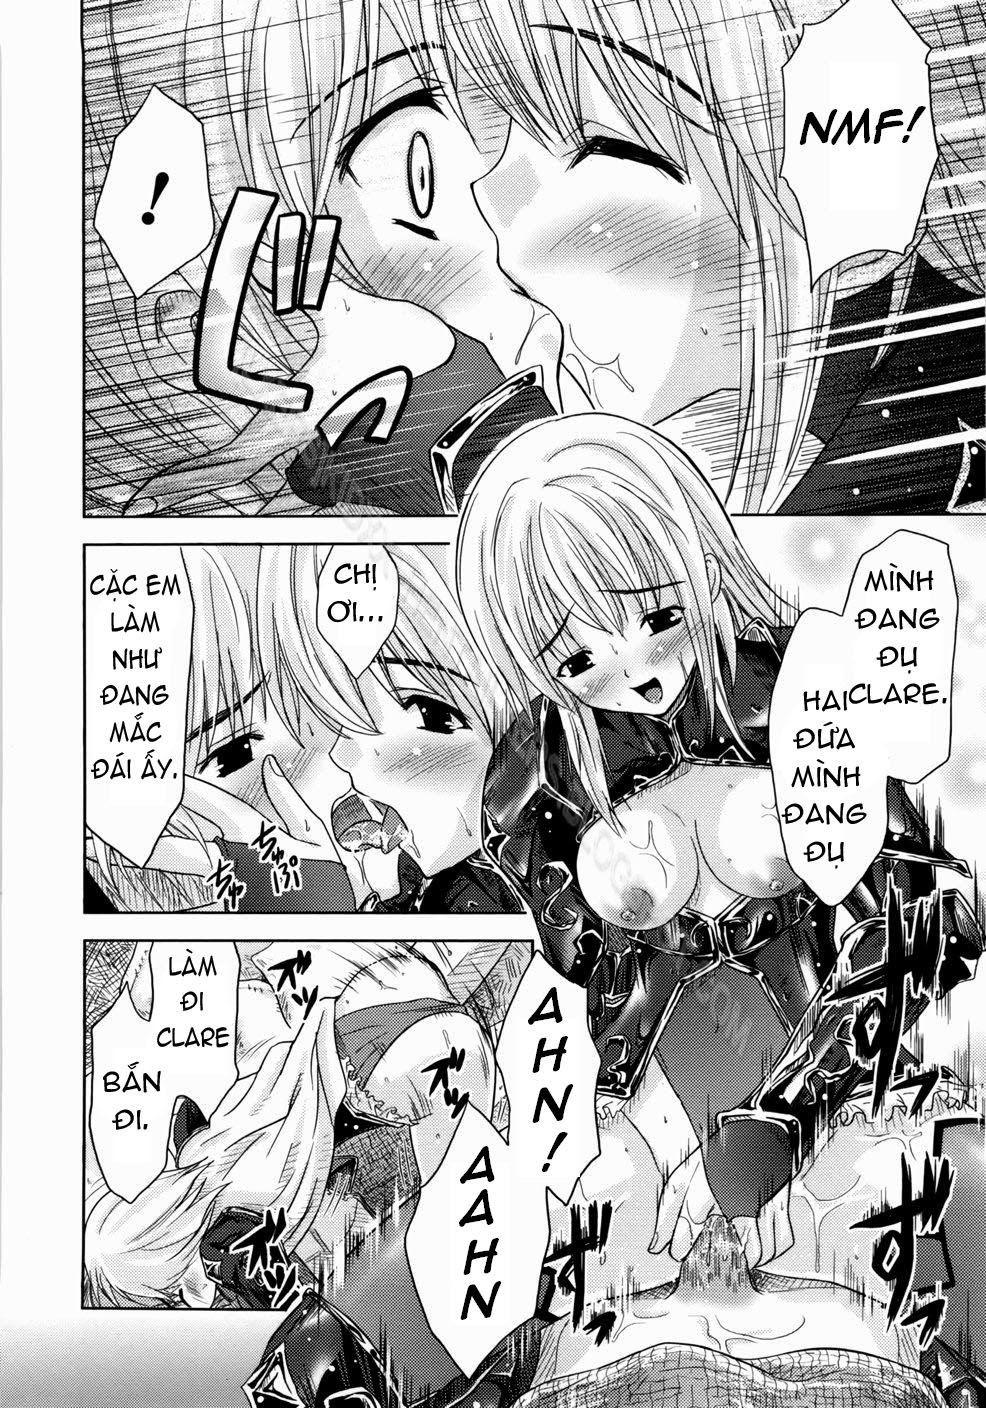 Xem ảnh Collapse Knight - Chapter 3 END - 1603258353563_0 - Hentai24h.Tv